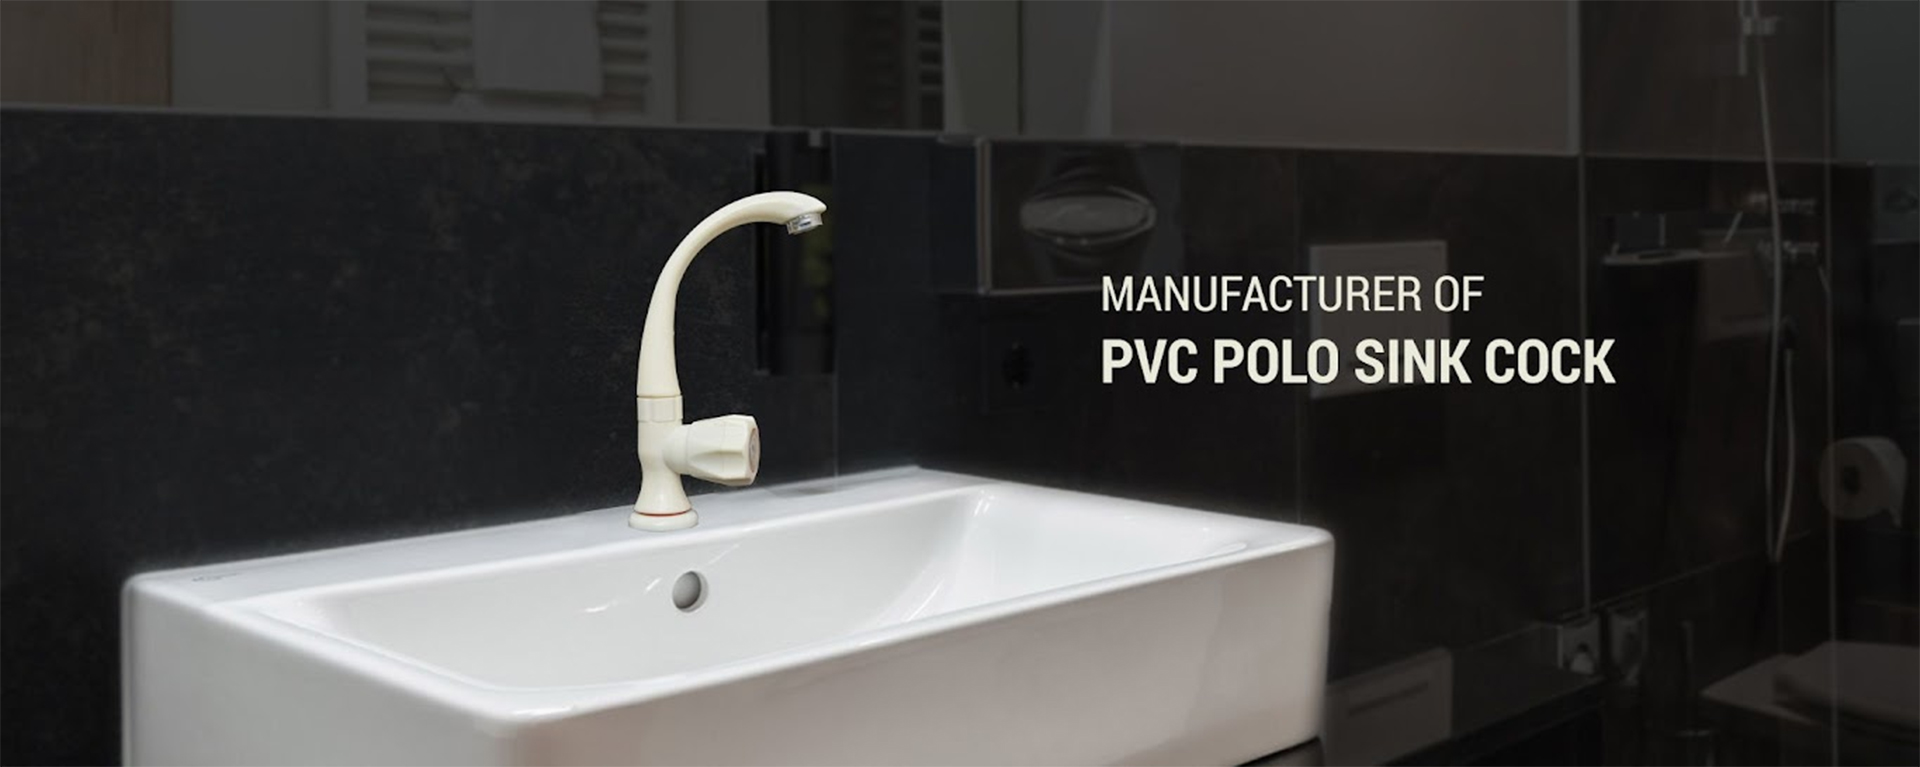 Manufacturer of PVC Polo Sink Cock